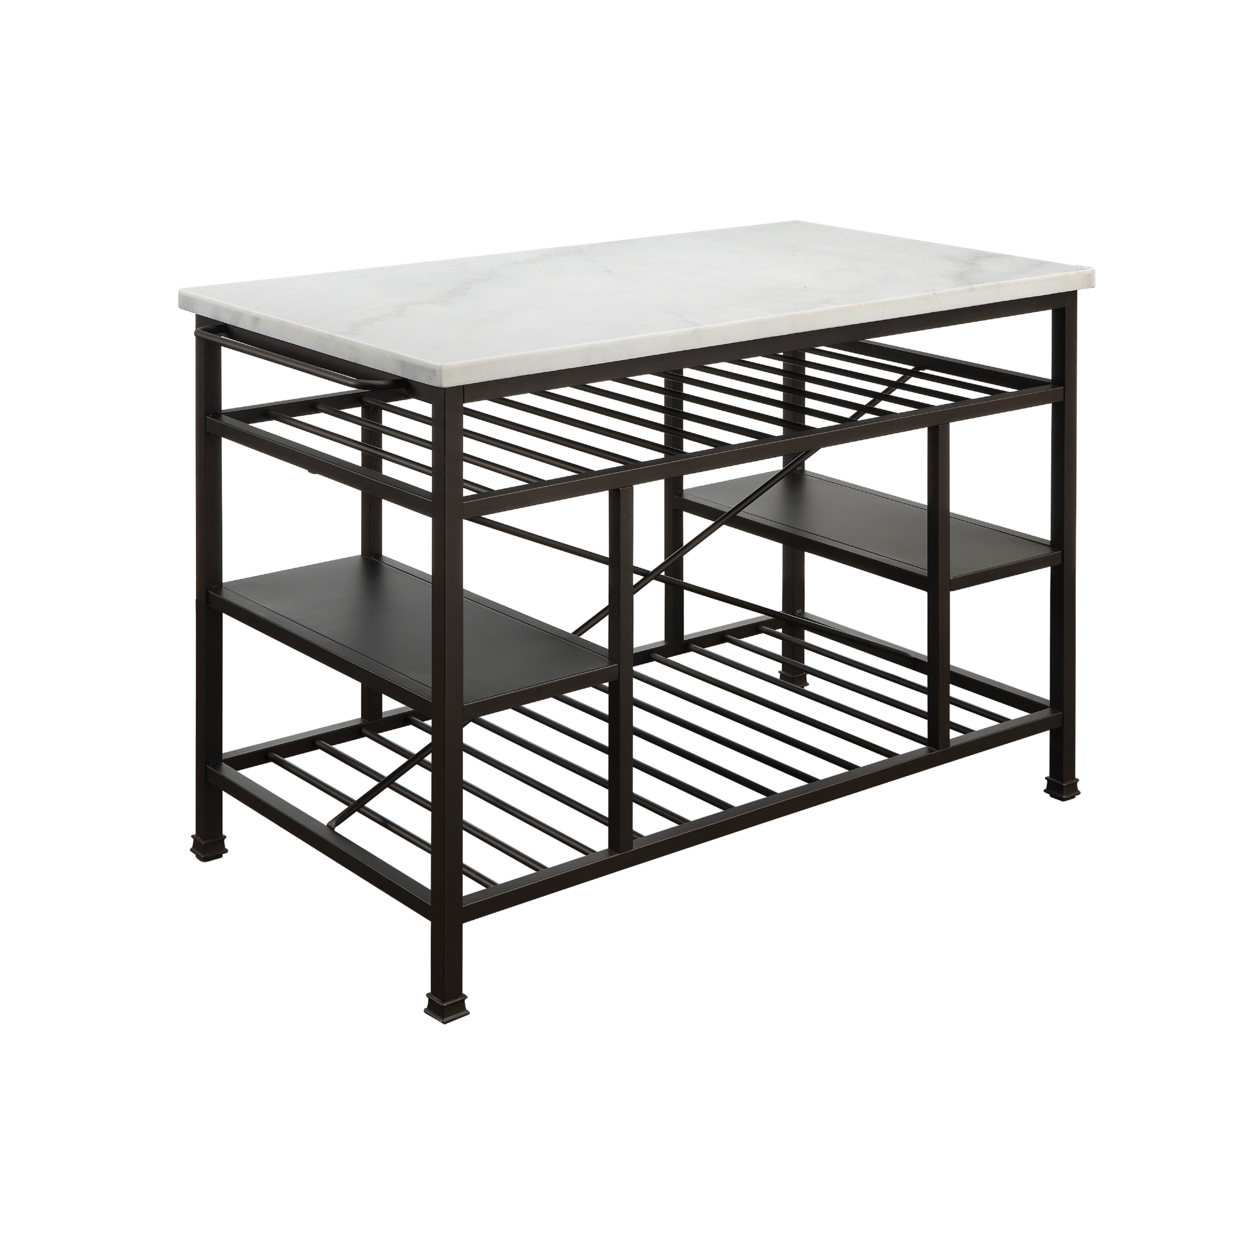 Marble Top Metal Kitchen Island With 2 Slated Shelves, Brown And White- Saltoro Sherpi